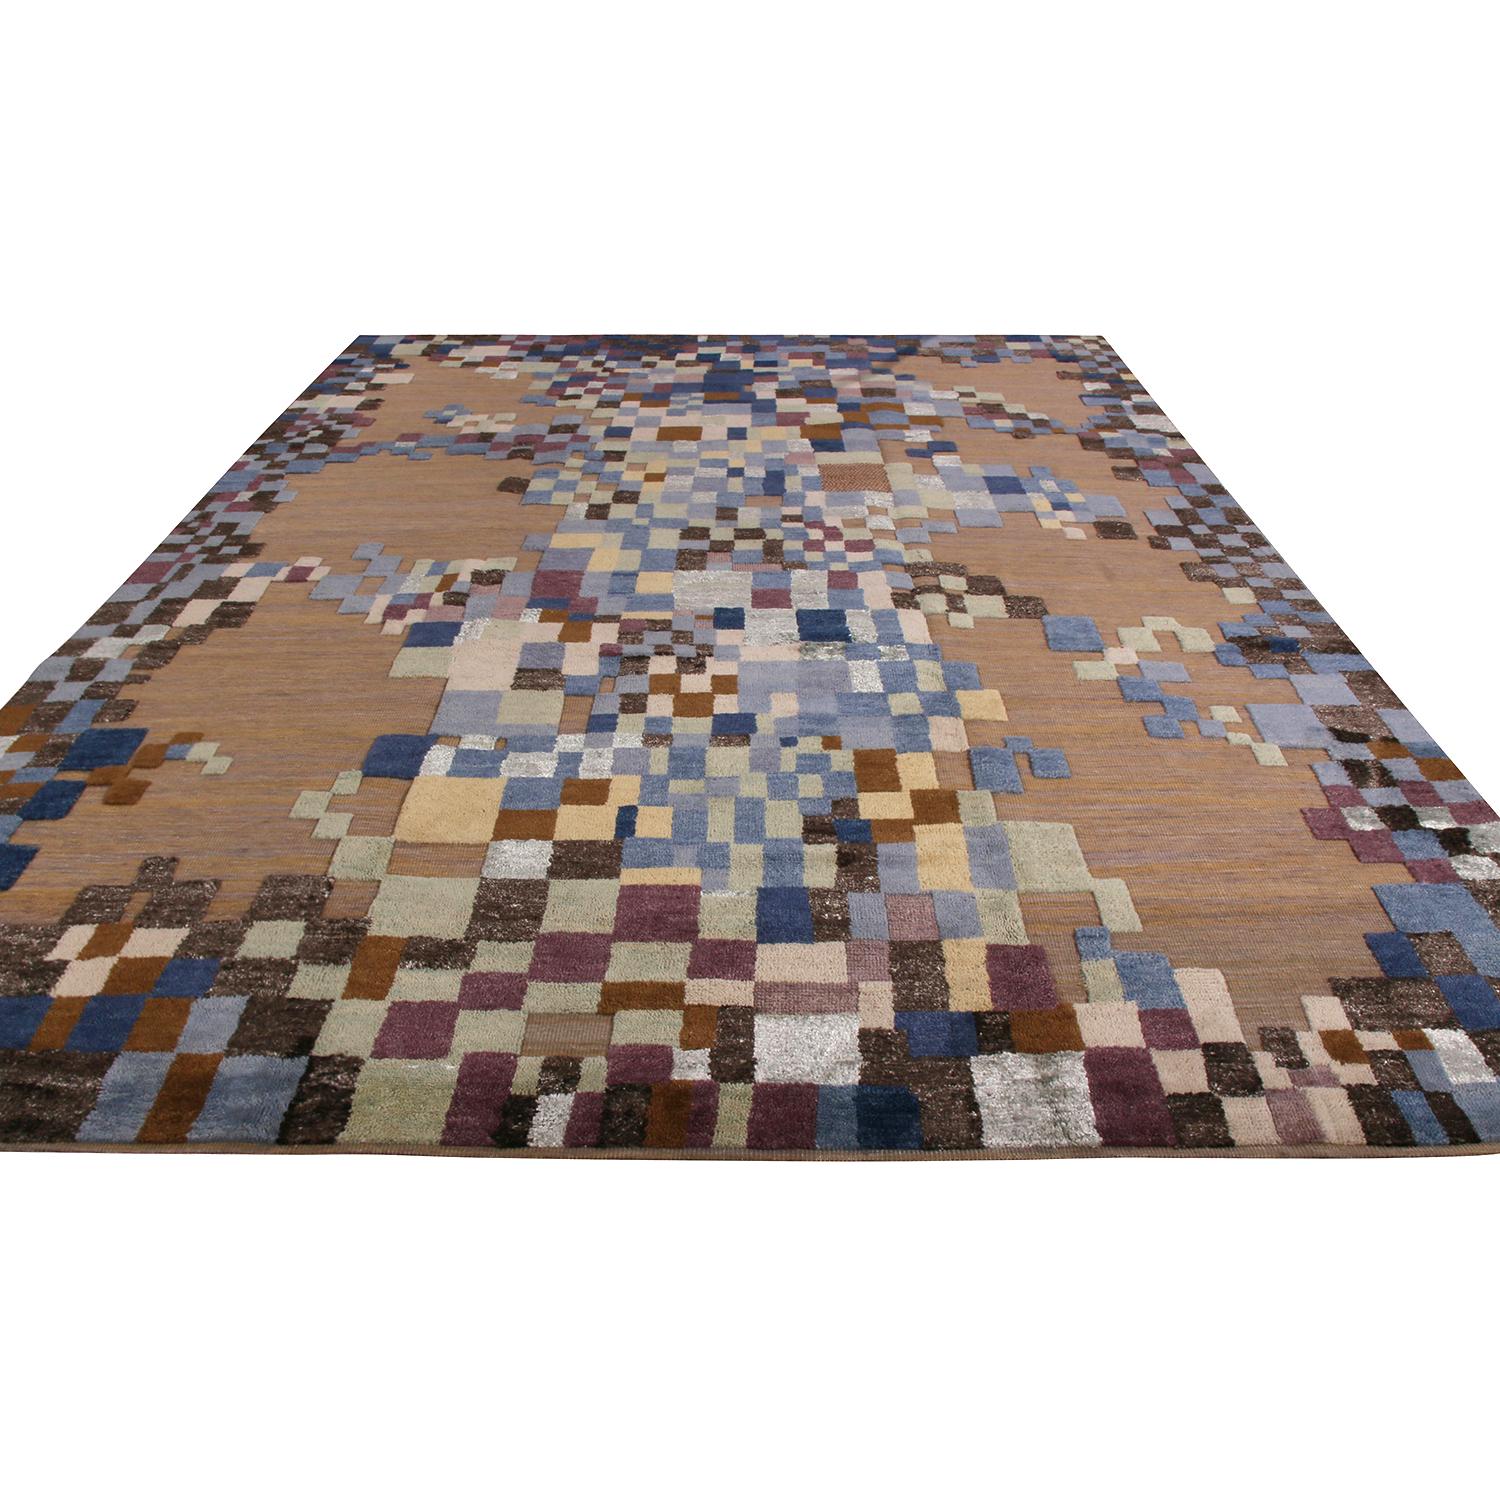 Hand knotted in texturally soft, inviting wool, this modern 9 x 12 rug hails from the latest additions to Rug & Kilim’s Scandinavian Collection, a celebration of Swedish modernism with new large-scale geometry and exciting vintage colorways like